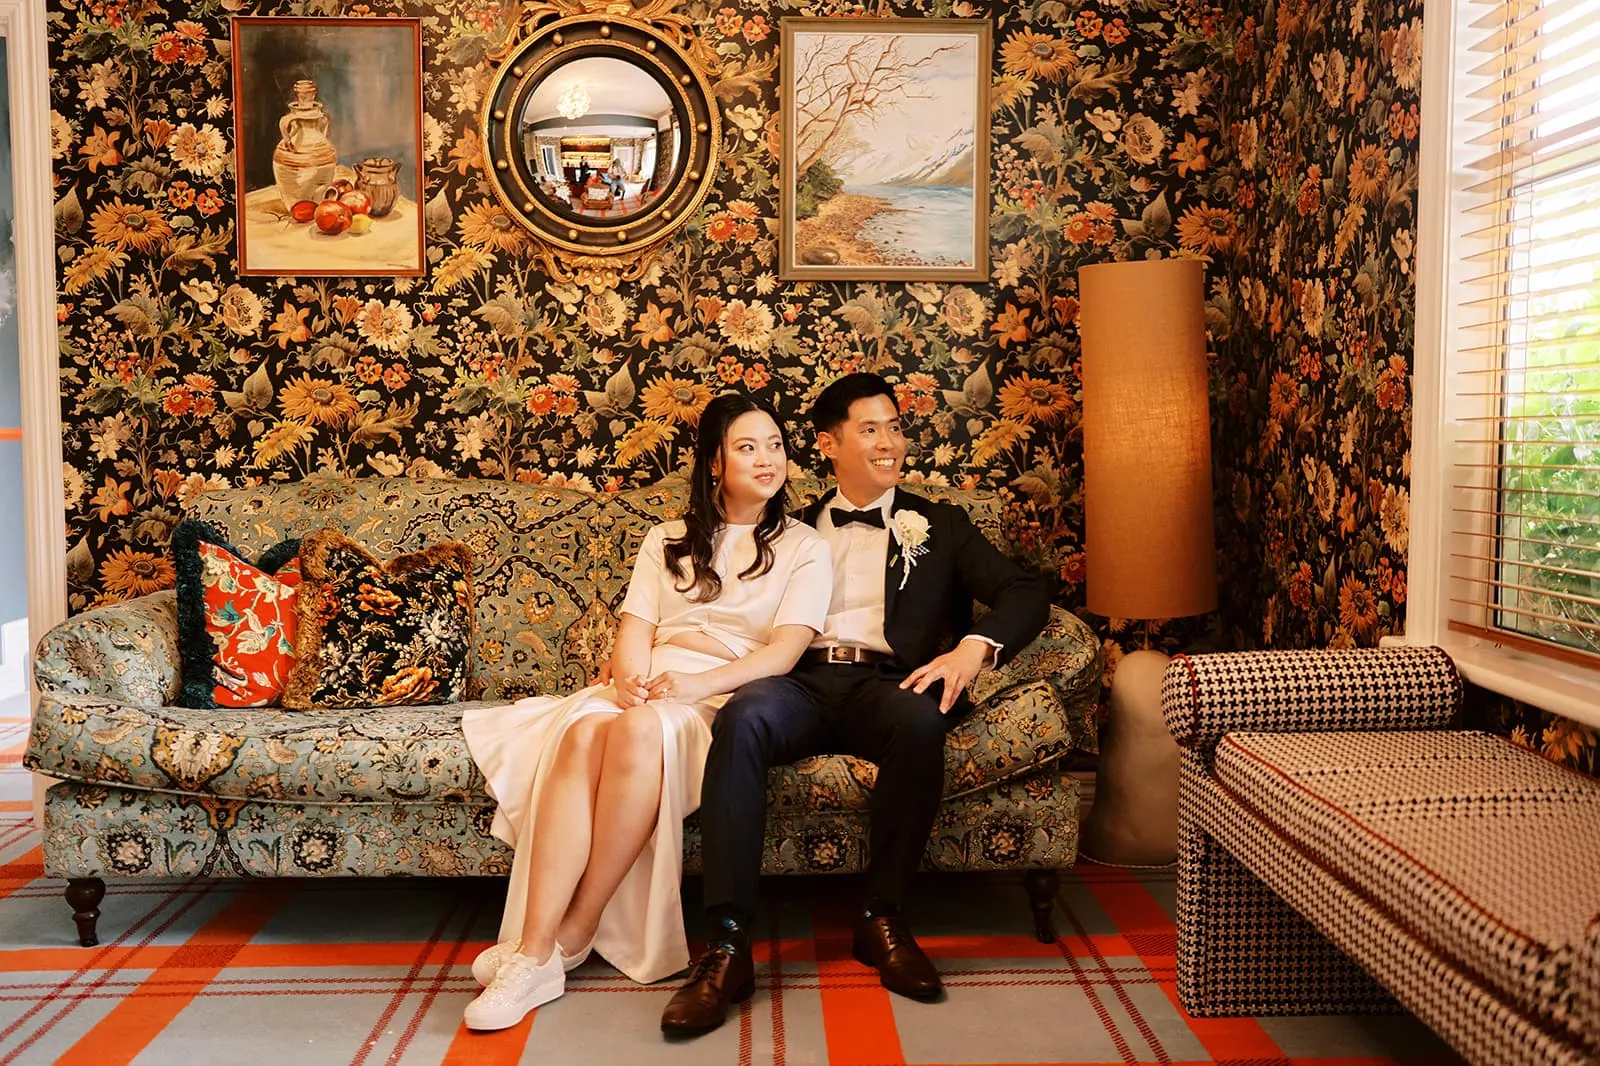 Queenstown Elopement Heli Wedding Photographer クイーンズタウン結婚式 | A couple's pre-wedding photoshoot captures the bride and groom sitting on a couch in a room adorned with elegant floral wallpaper.